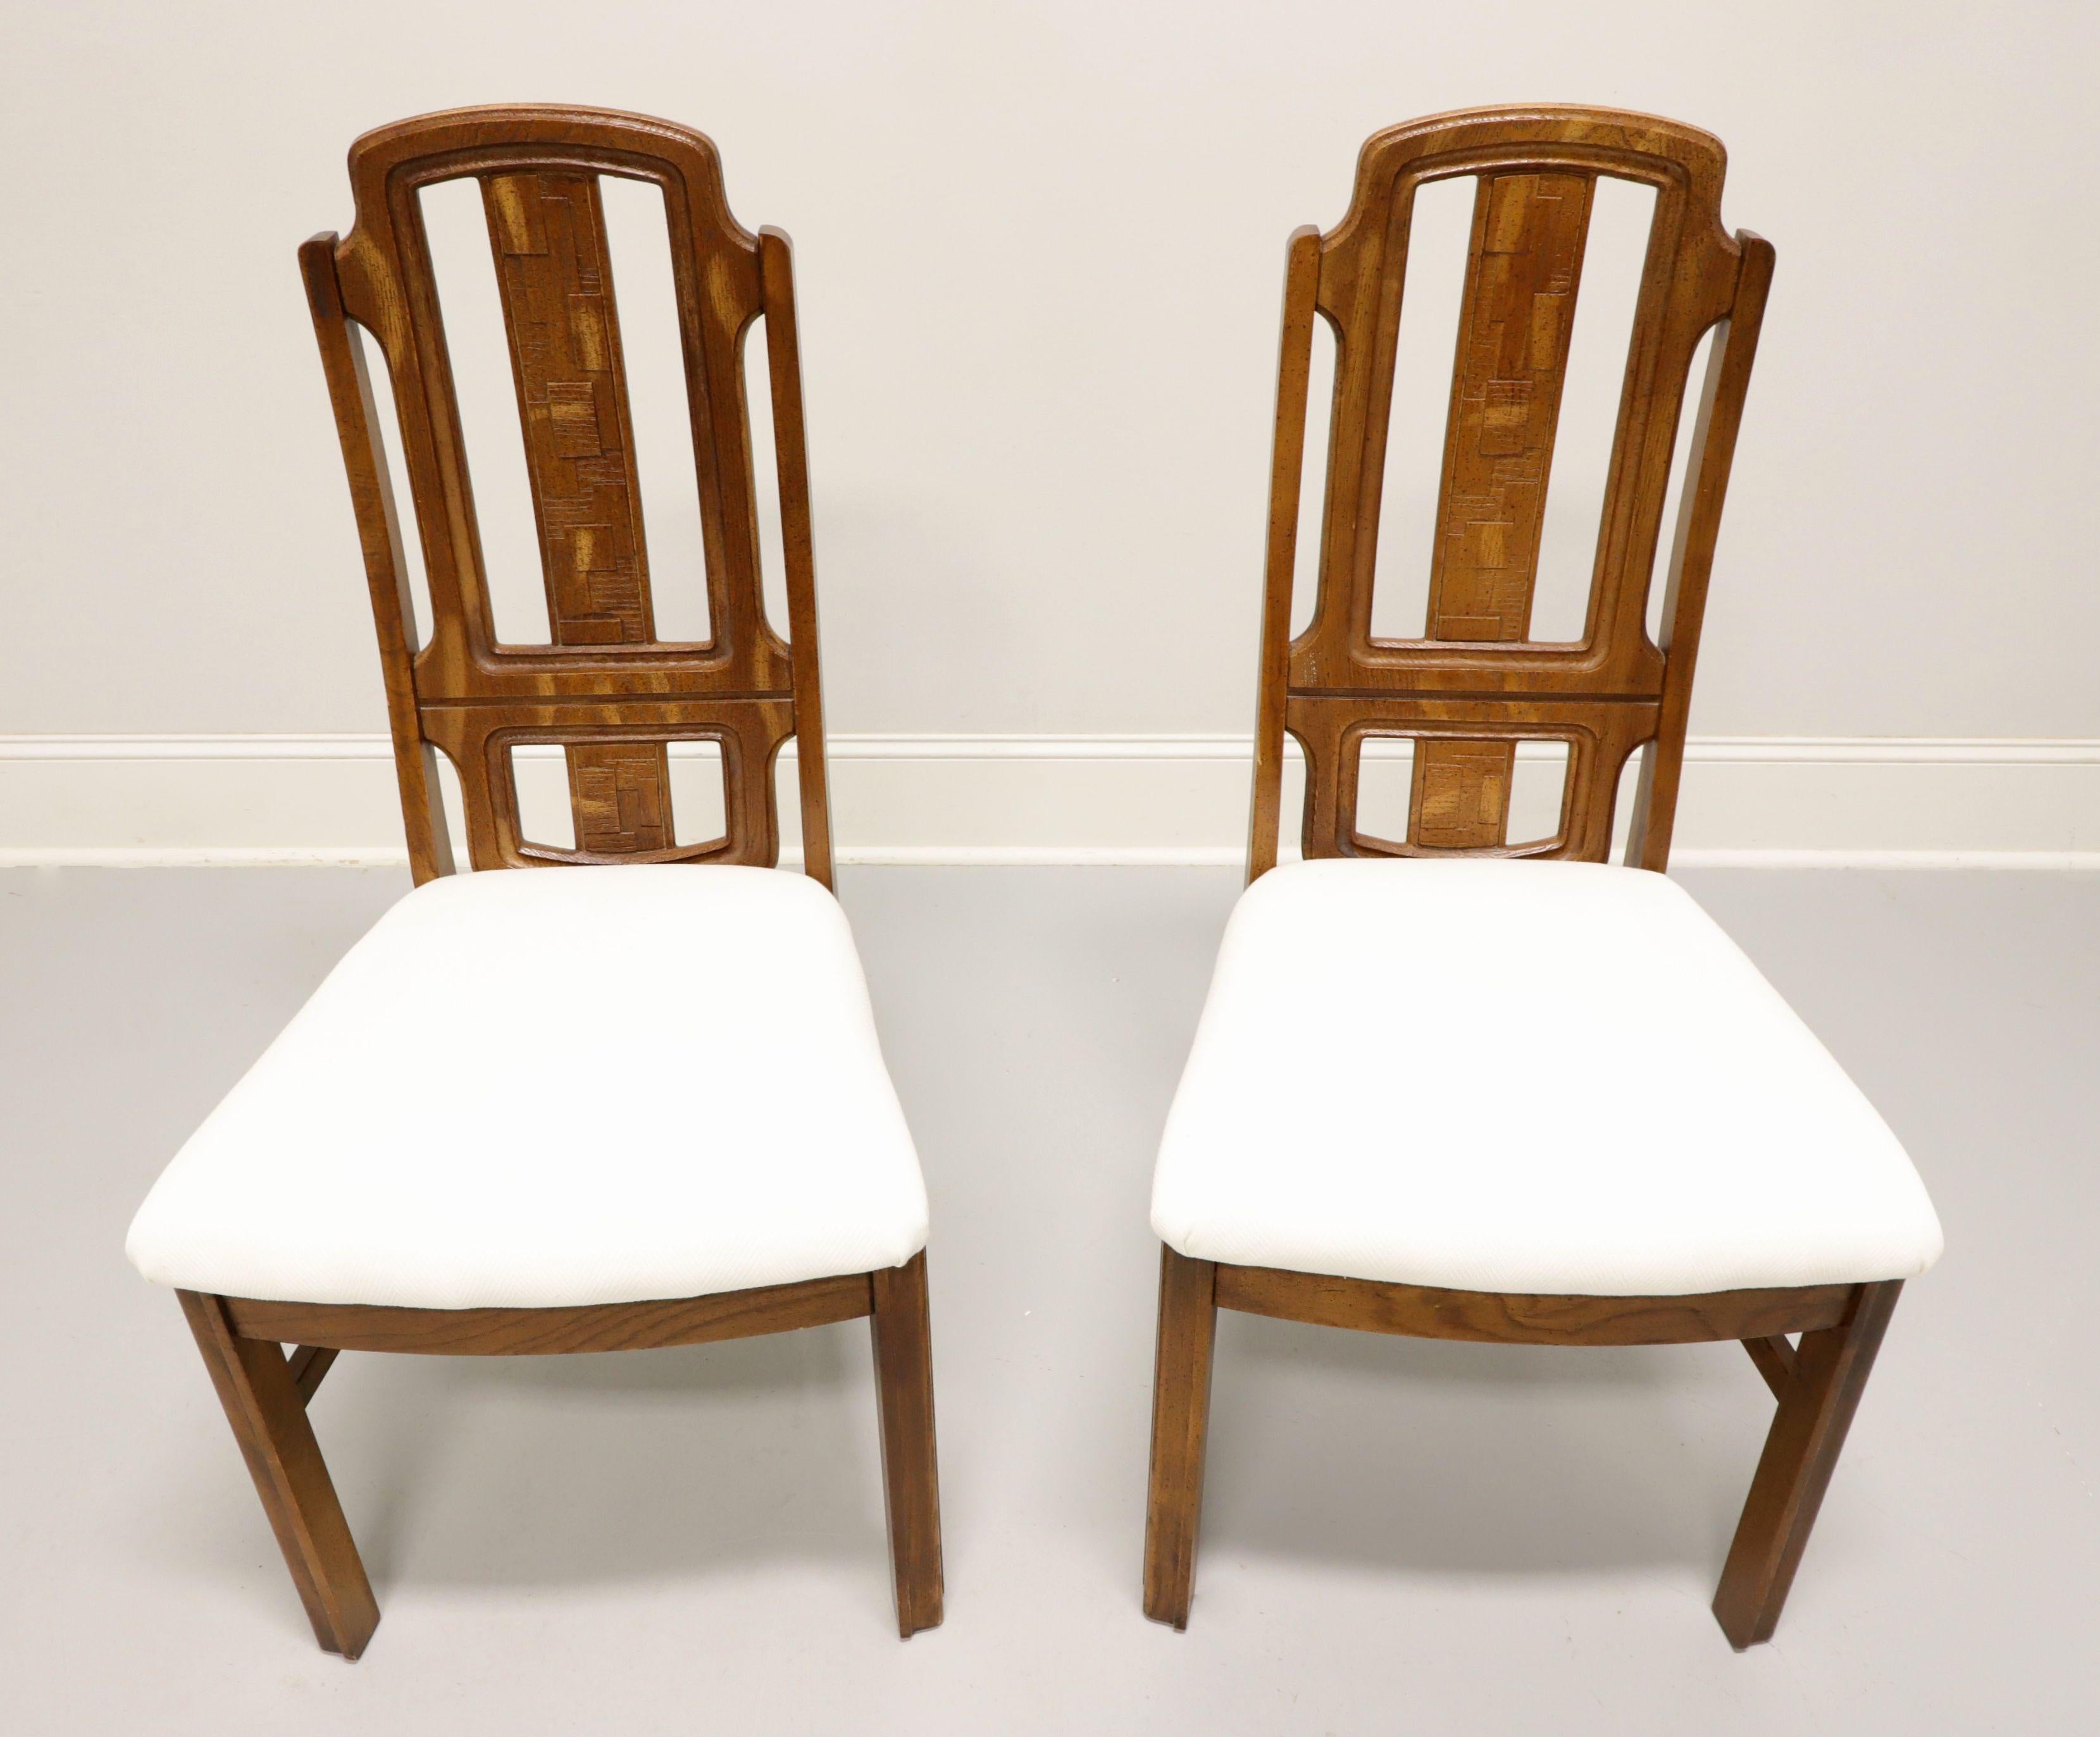 A pair of Mid 20th Century Brutalist style dining side chairs by Broyhill Premier. Oak with slightly distressed finish, arched crestrail, raised & textured geometric design to backrest, neutral cream color fabric upholstered seat, stretchers, and